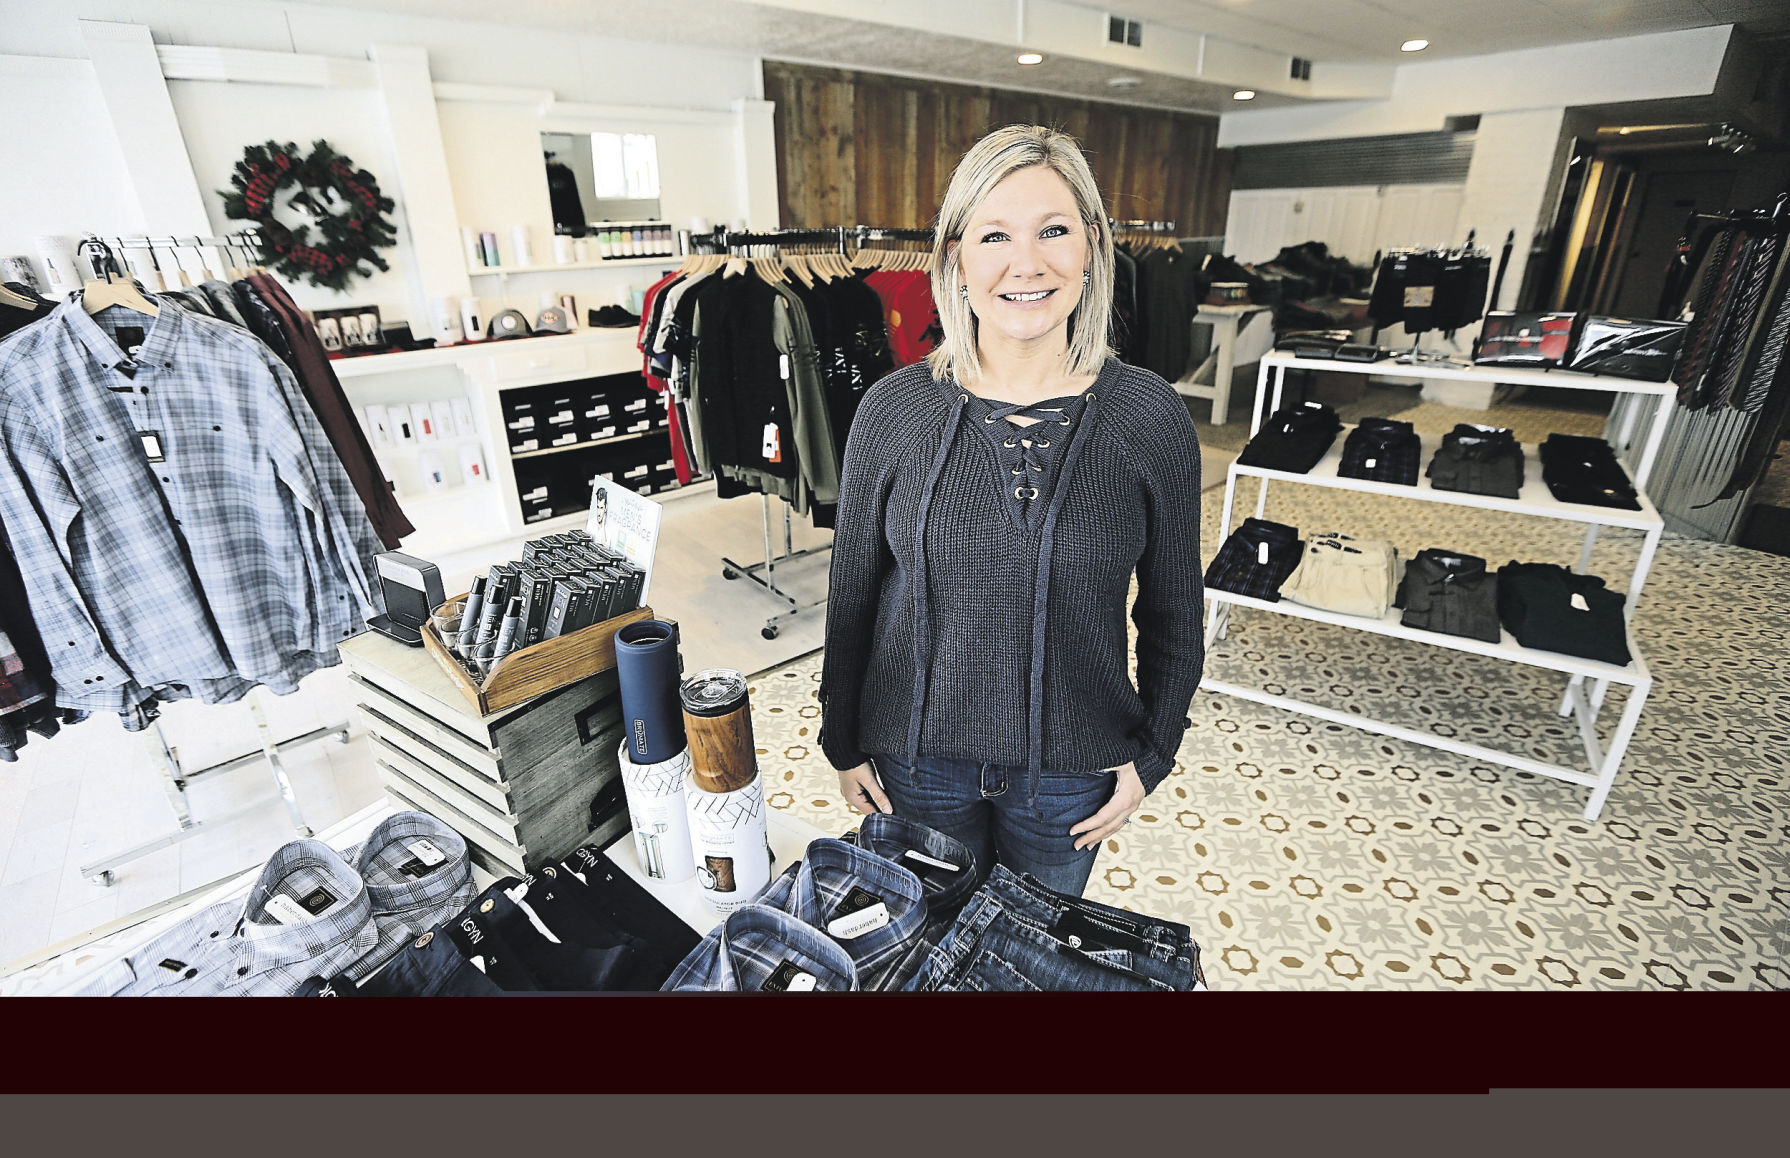 Jennifer Recker, owner of the Haberdash Outfitters Co. in Dyersville, Iowa. PHOTO CREDIT: Dave Kettering